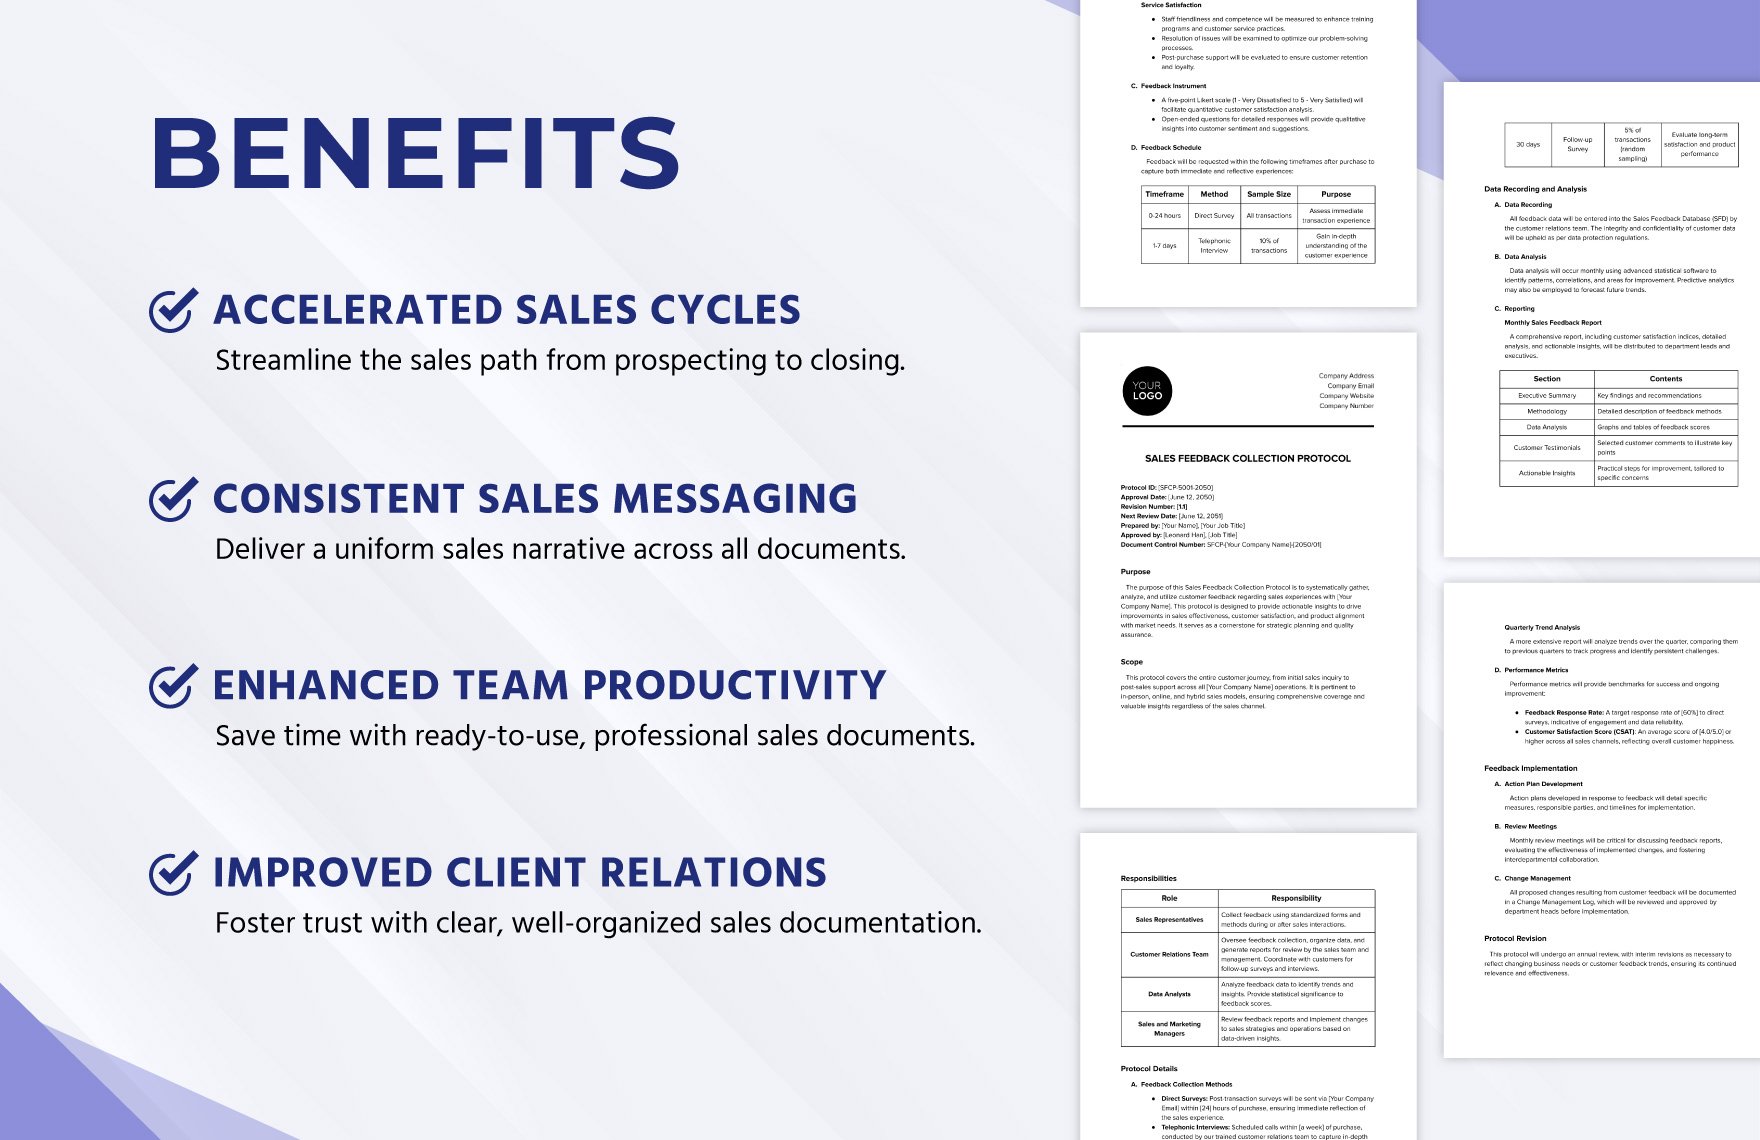 Sales Feedback Collection Protocol Template